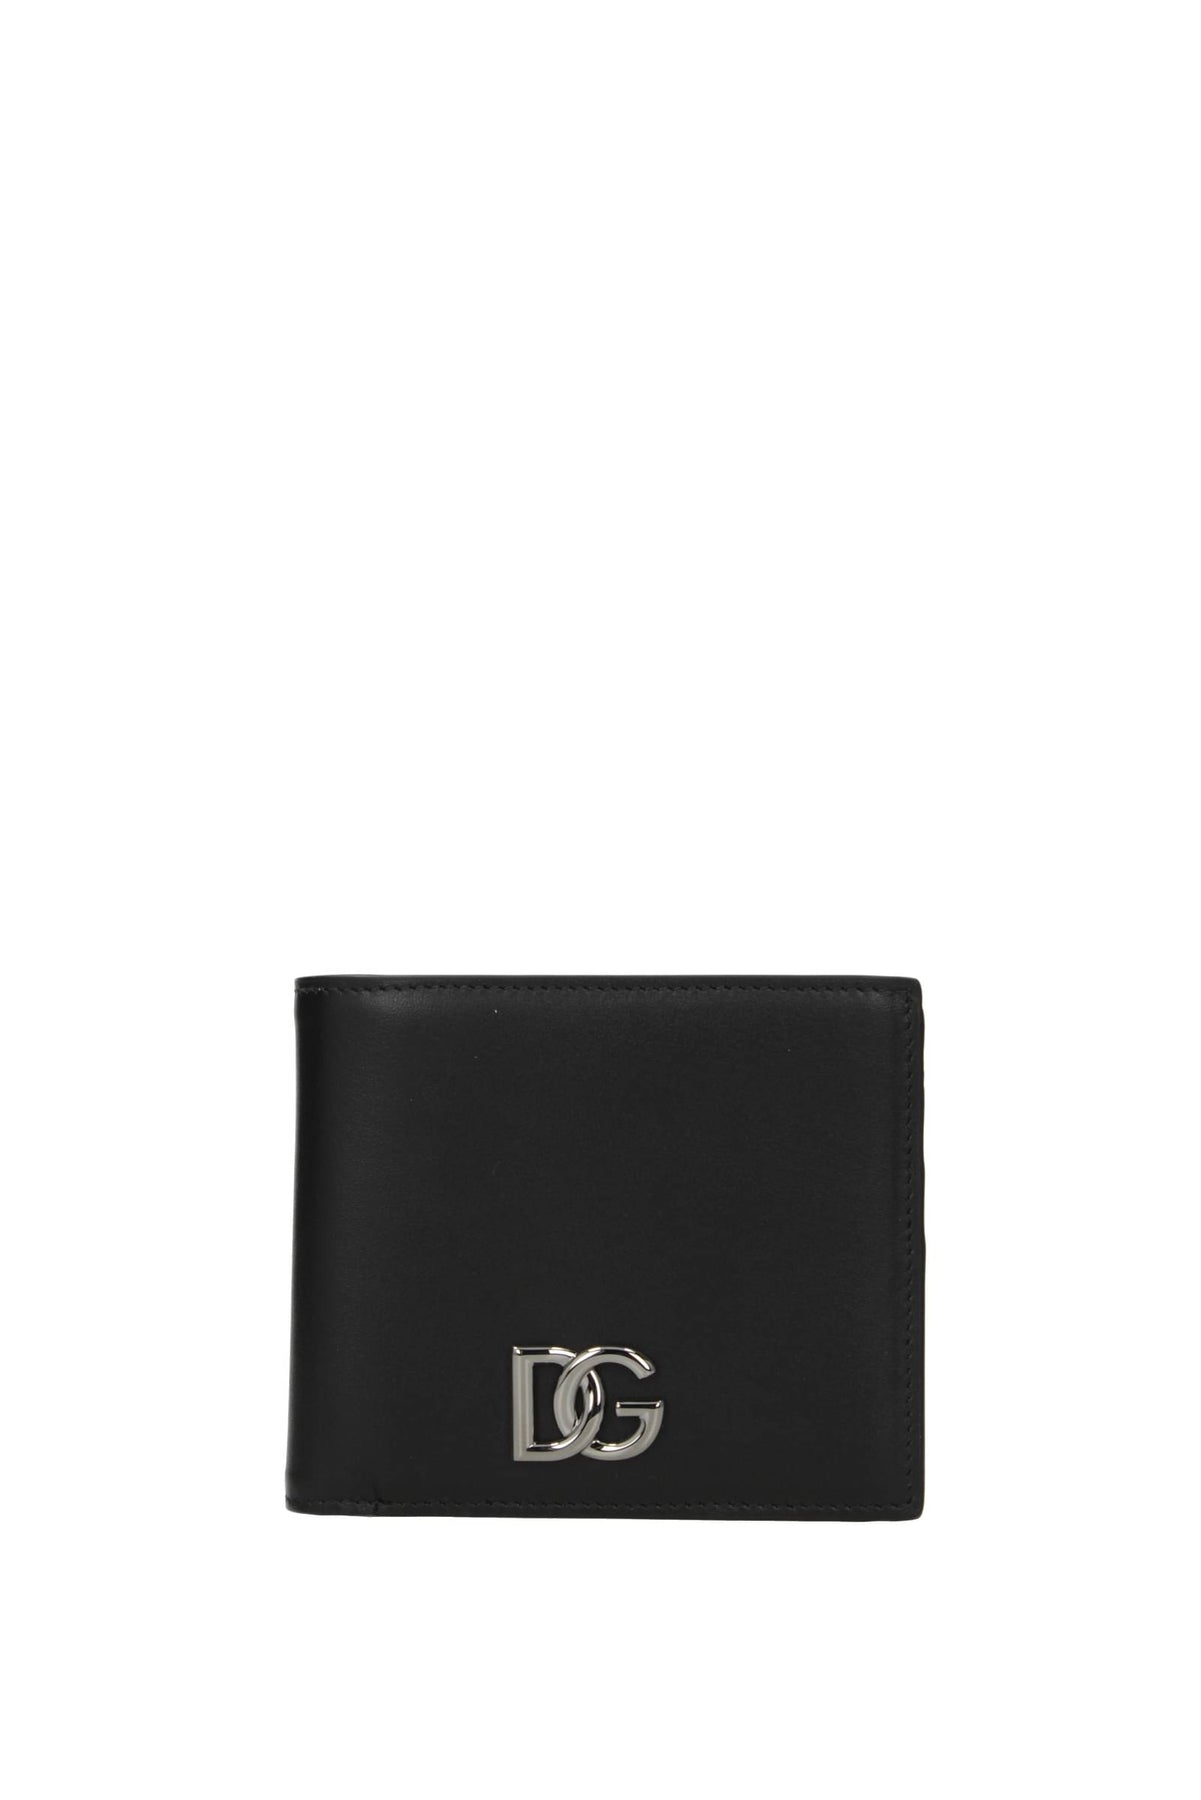 DOLCE & GABBANA WALLETS LEATHER